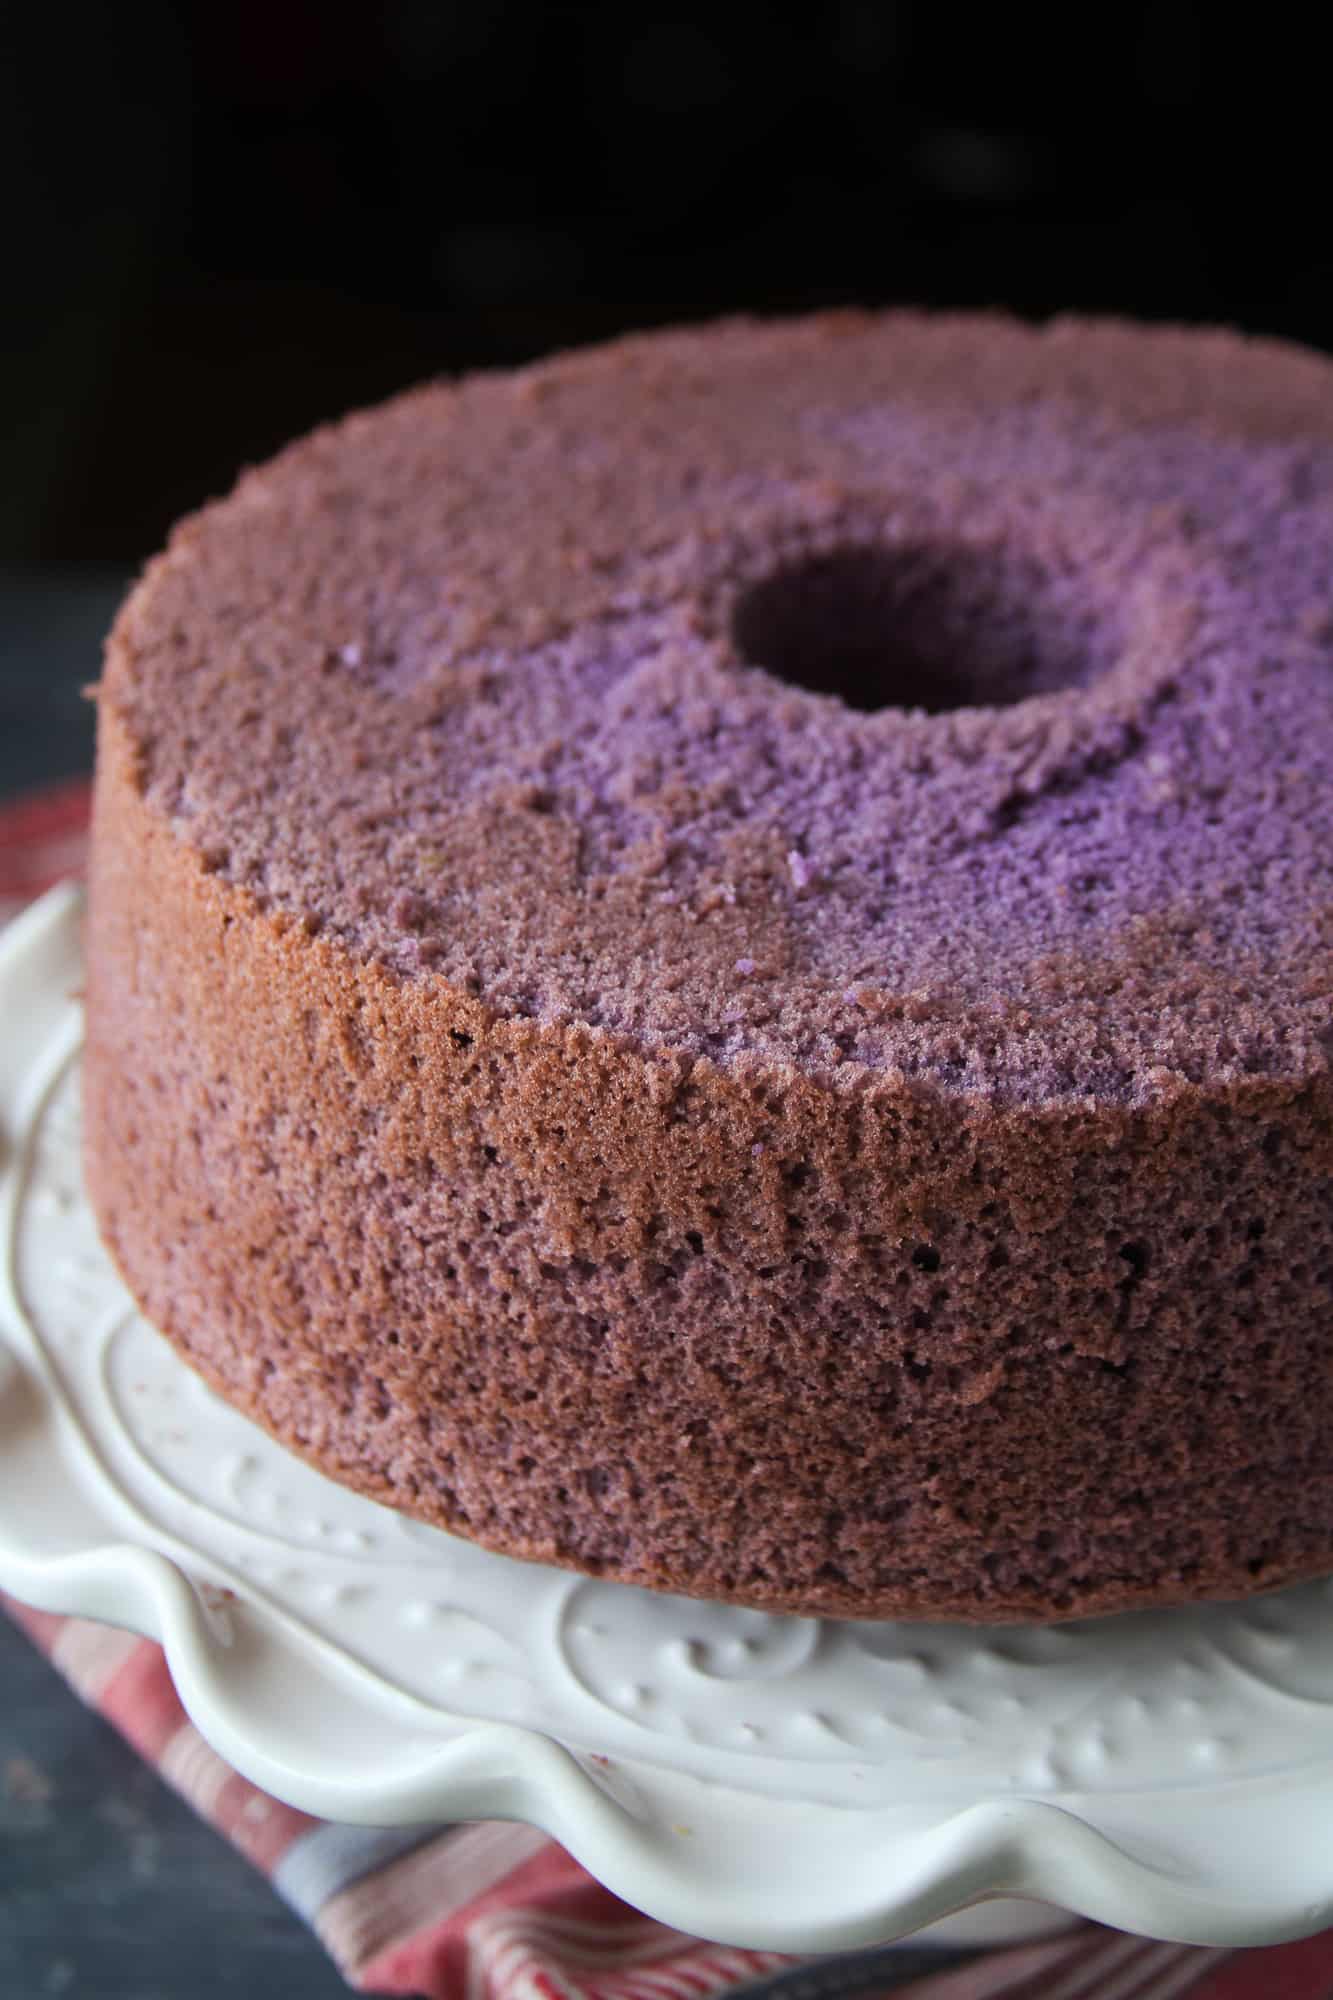 The baked ube chiffon cake without frosting on a cake stand.